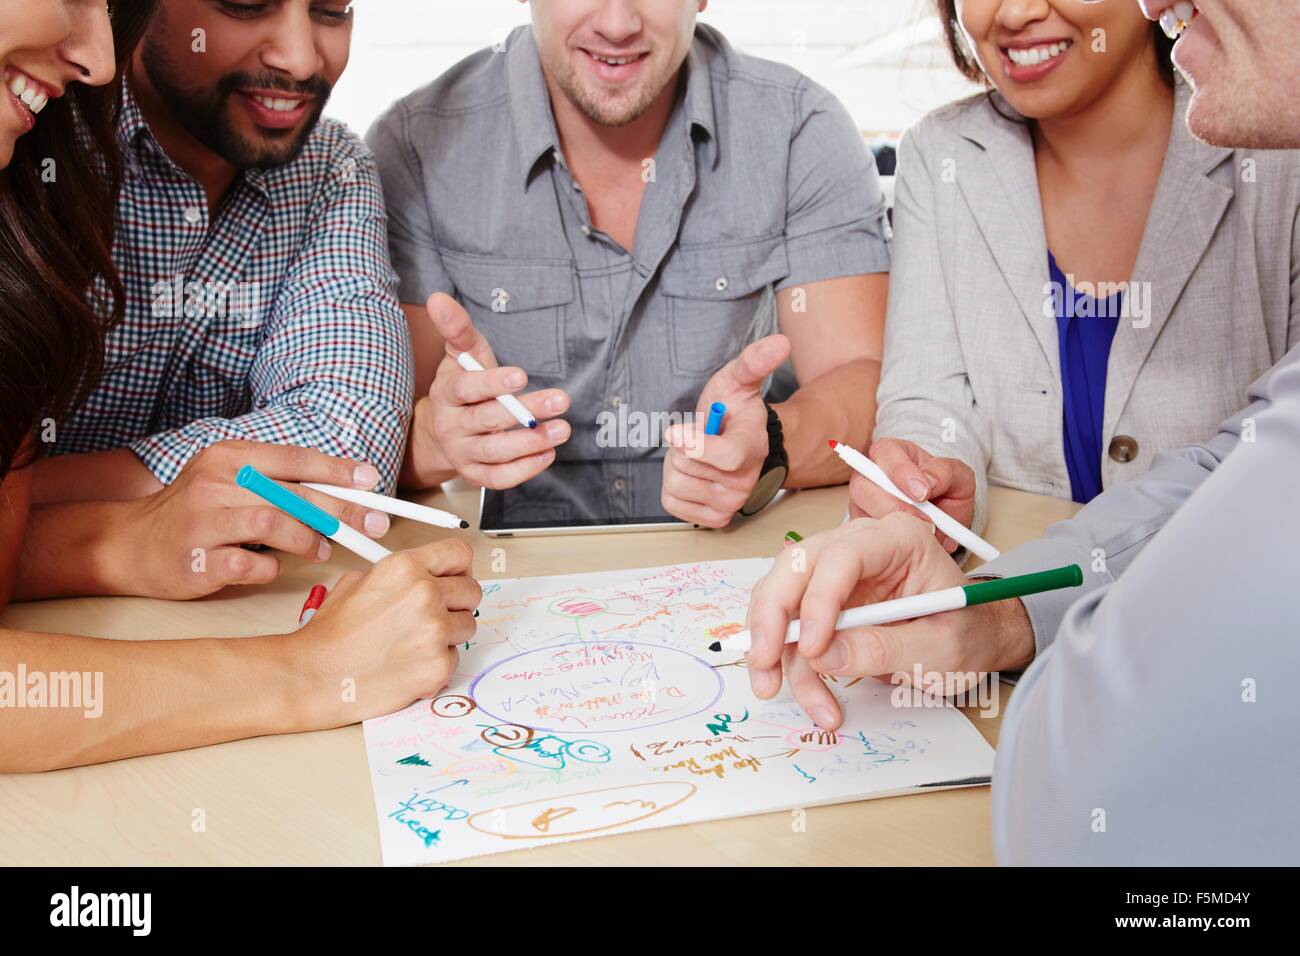 Small group of people having brainstorming business meeting Stock Photo